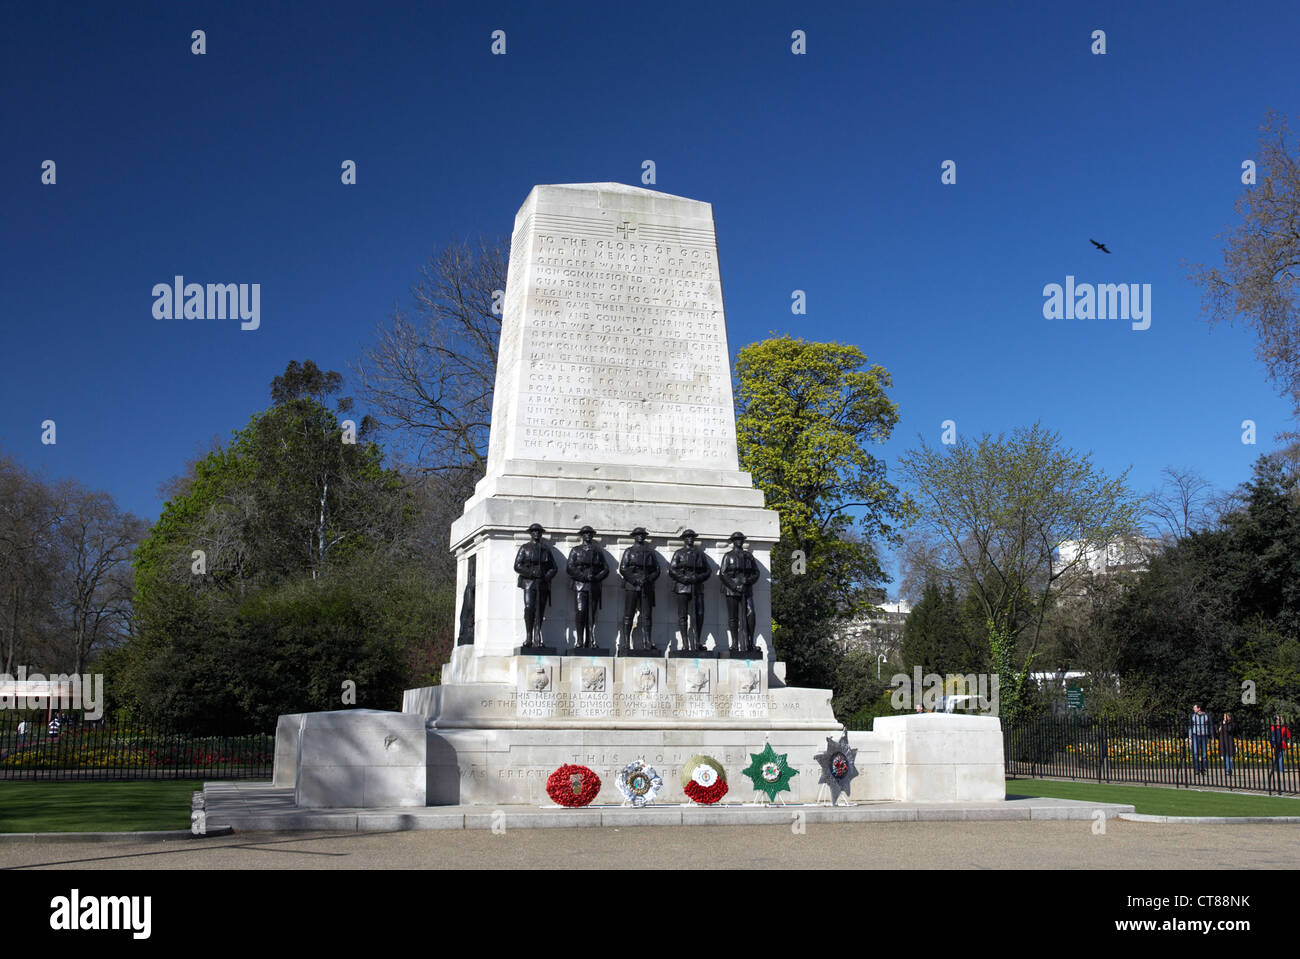 London - Monument in honor of fallen British soldiers Stock Photo